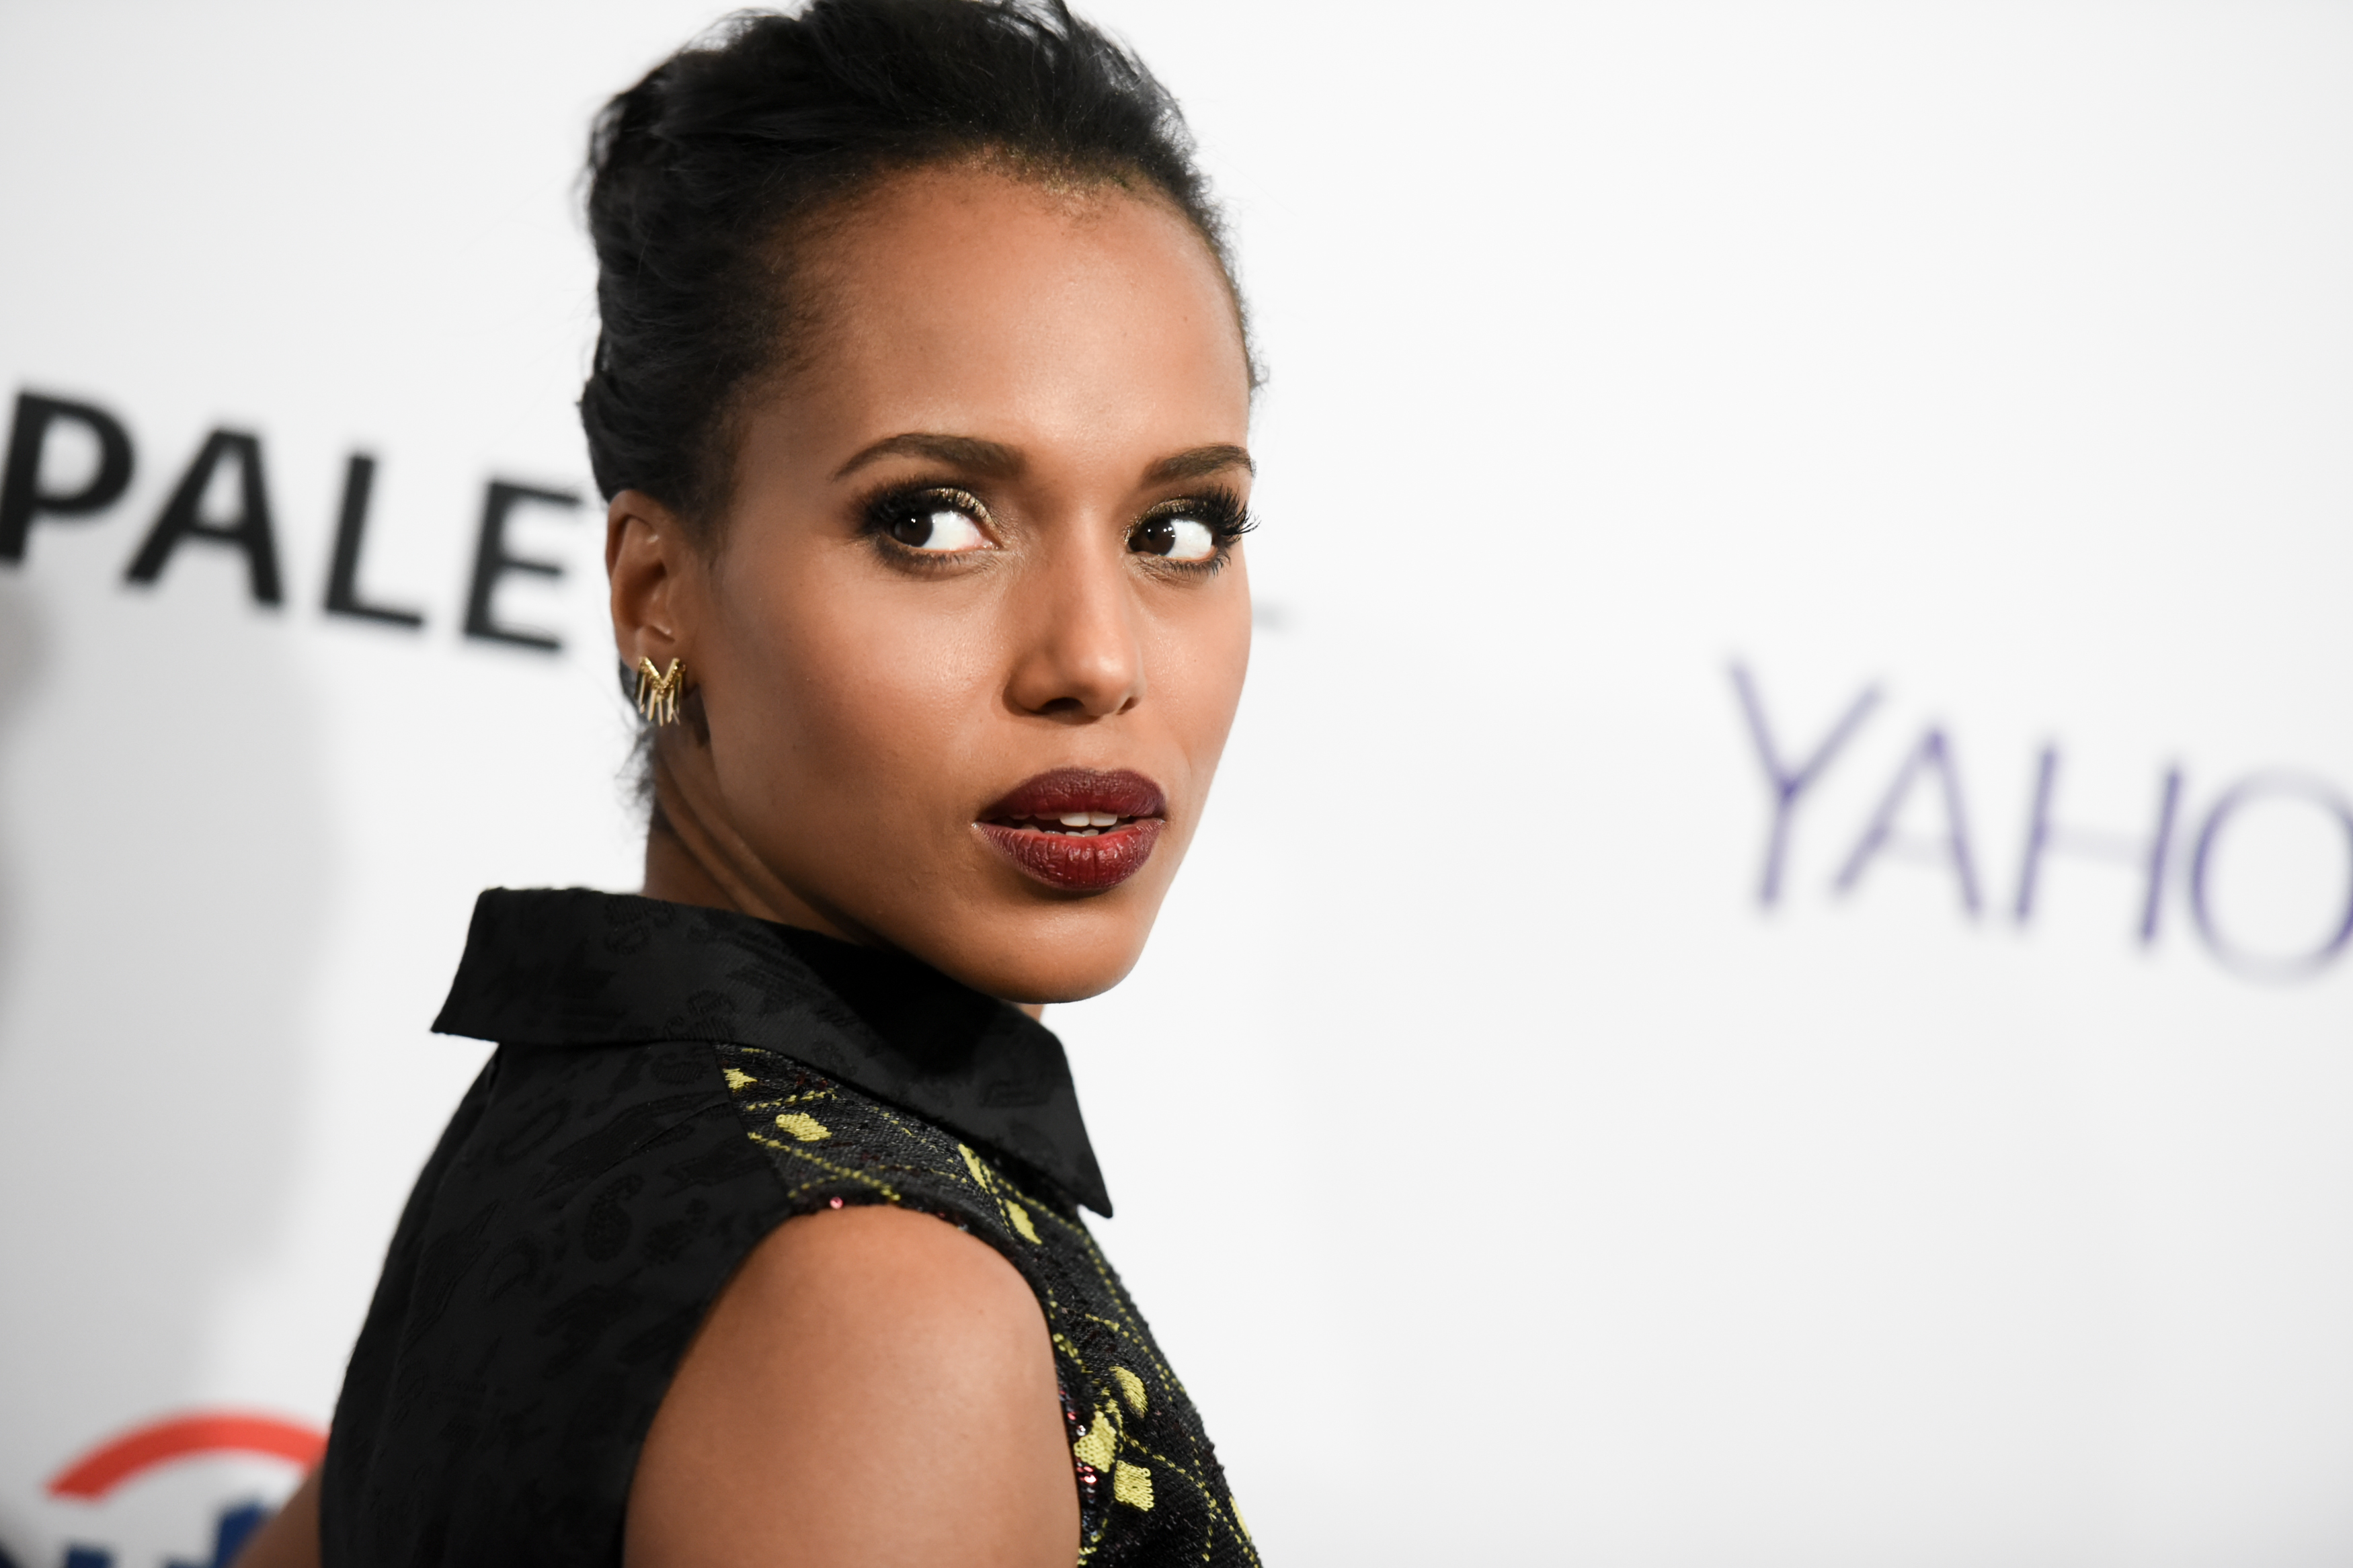 Kerry Washington arrives at the 32nd Annual Paleyfest : "Scandal" held at The Dolby Theatre on Sunday, March 8, 2015, in Los Angeles. (Richard Shotwell&mdash;Richard Shotwell/Invision/AP)